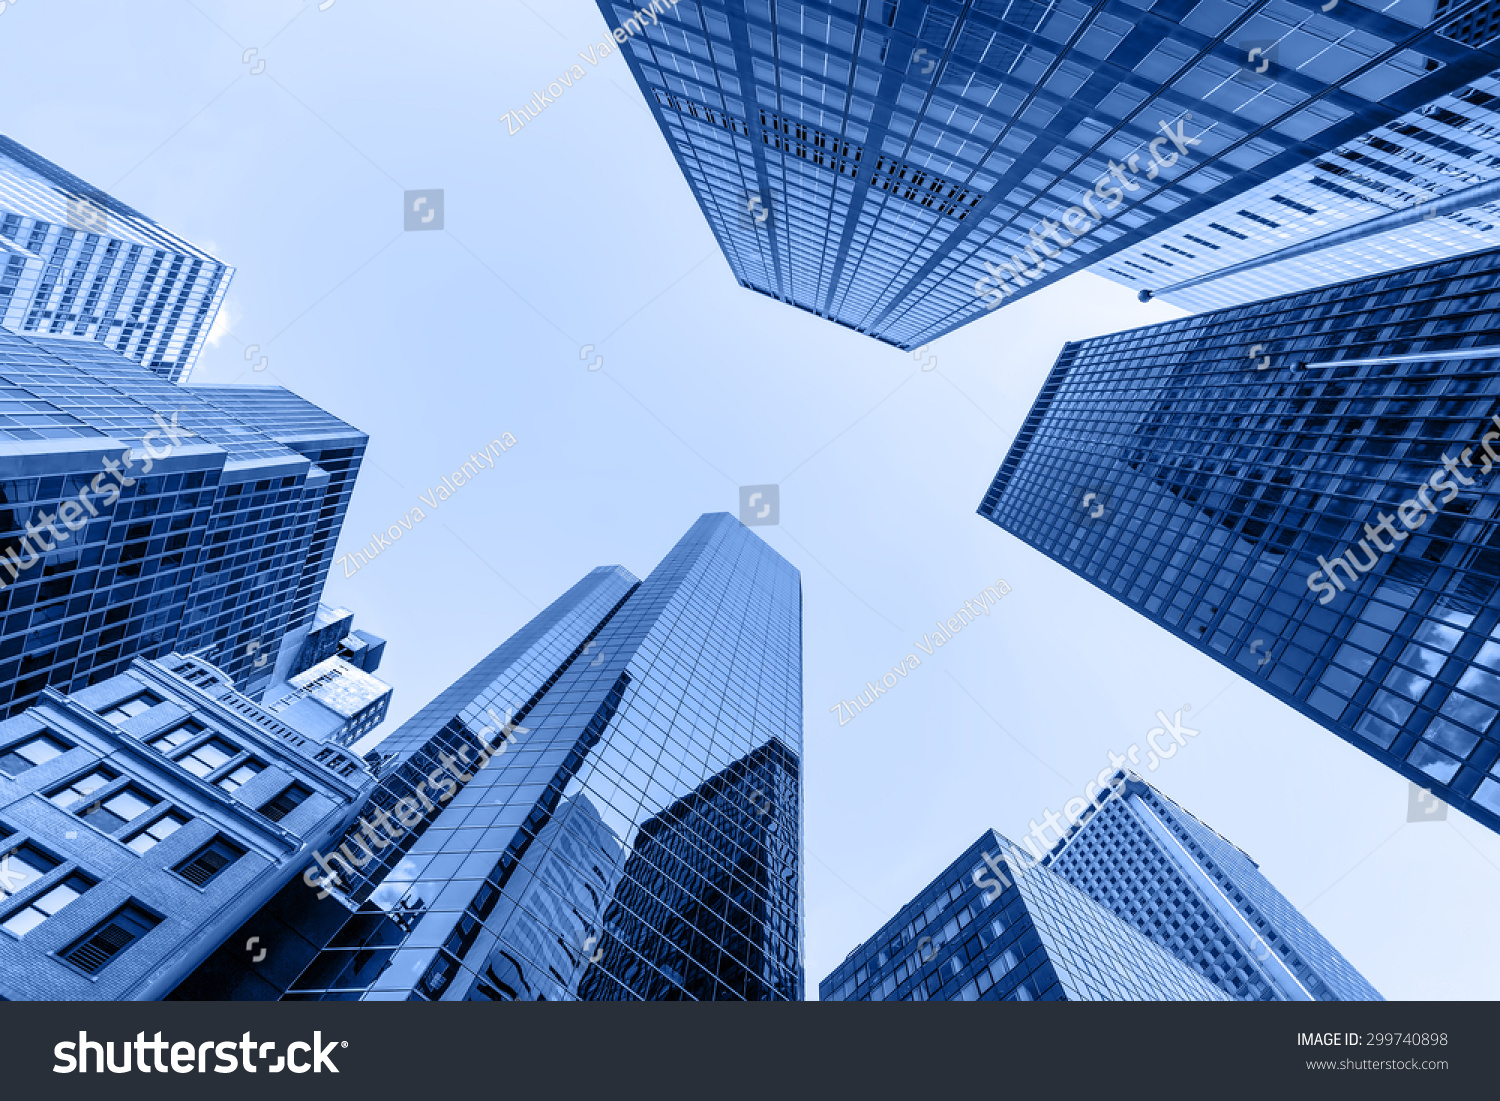 Up view in financial districtg, Manhattan, New York #299740898